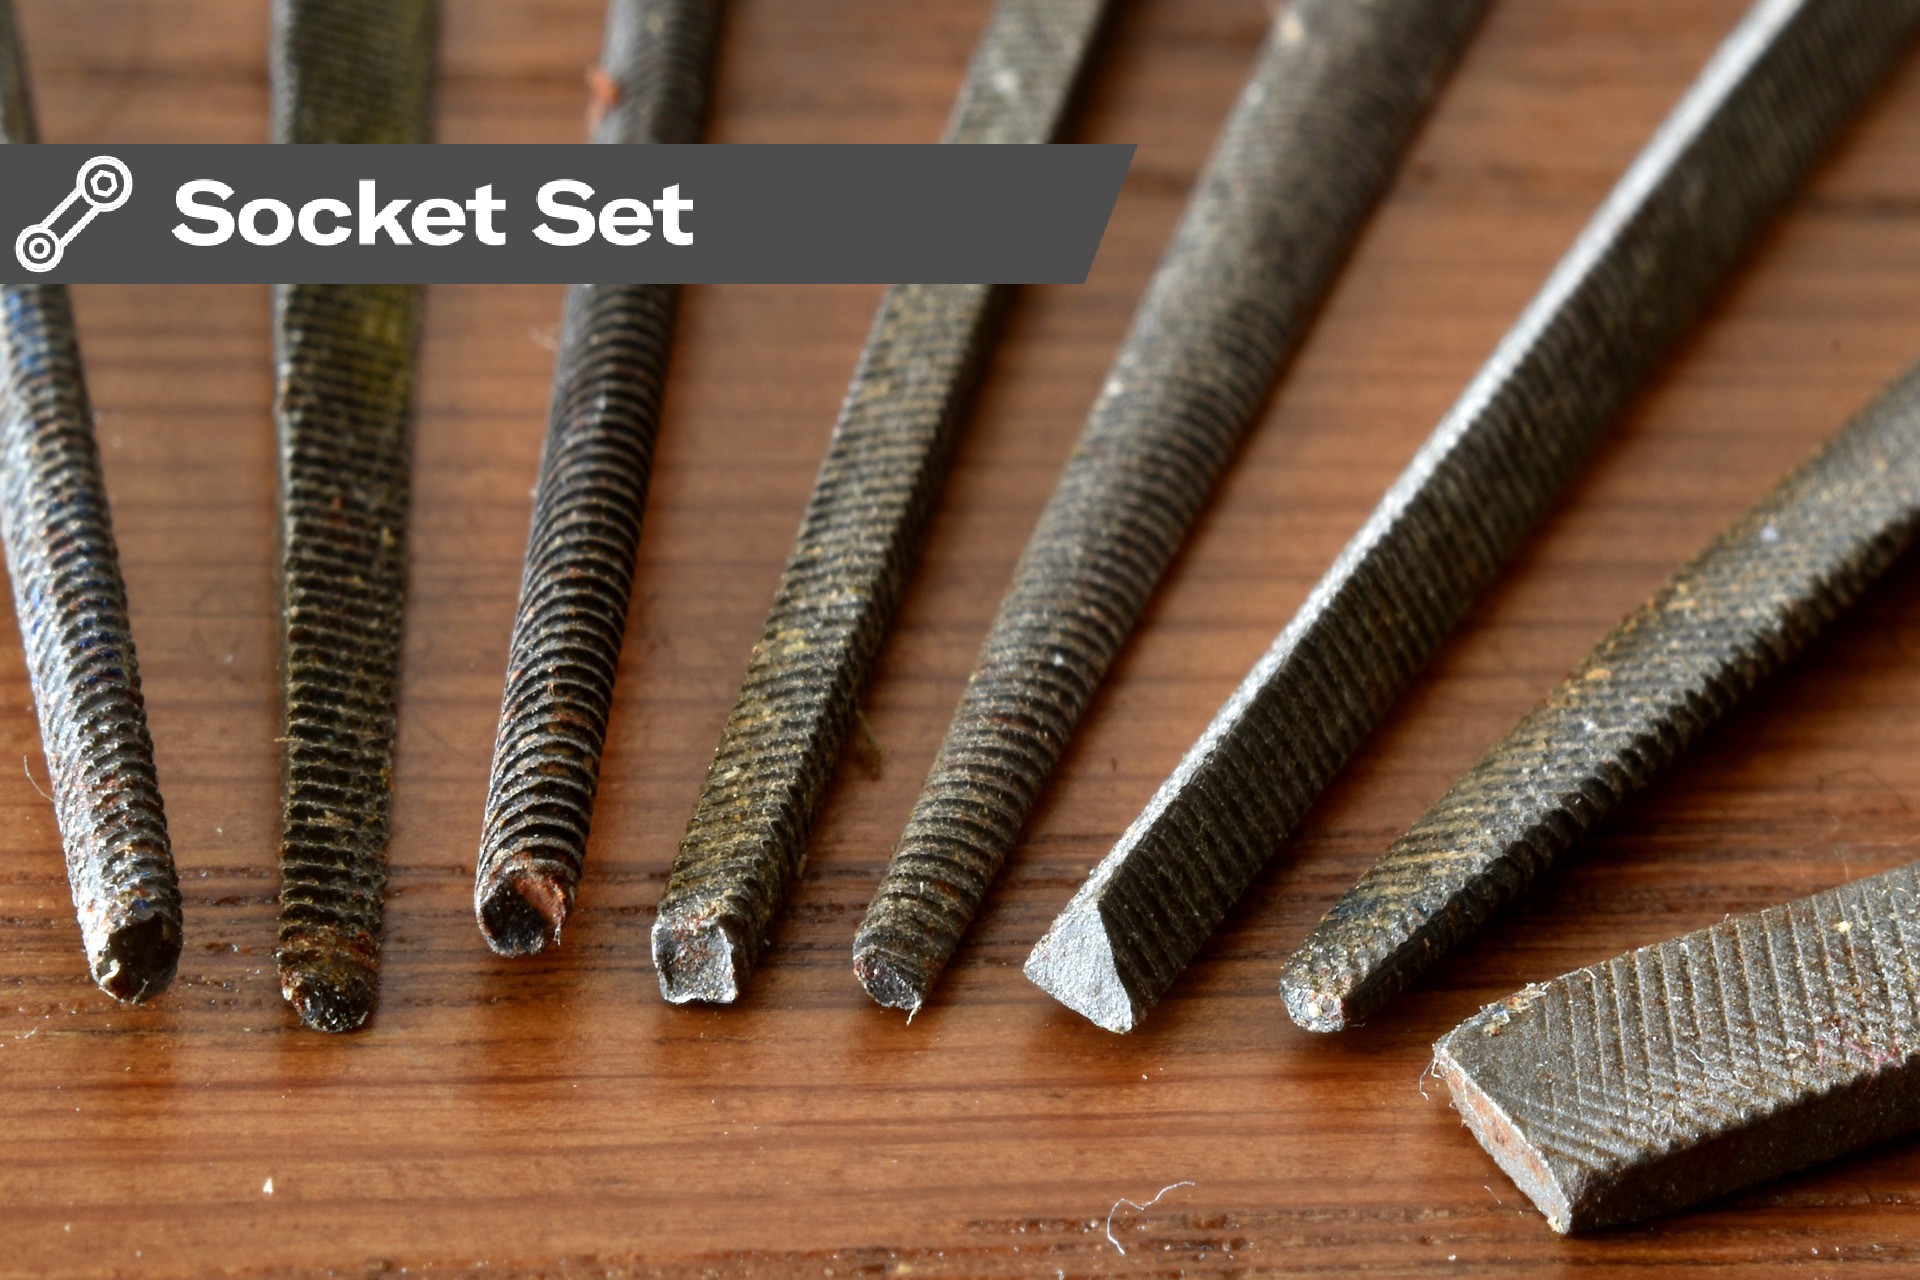 Socket Set: Filing needn’t be a rough experience